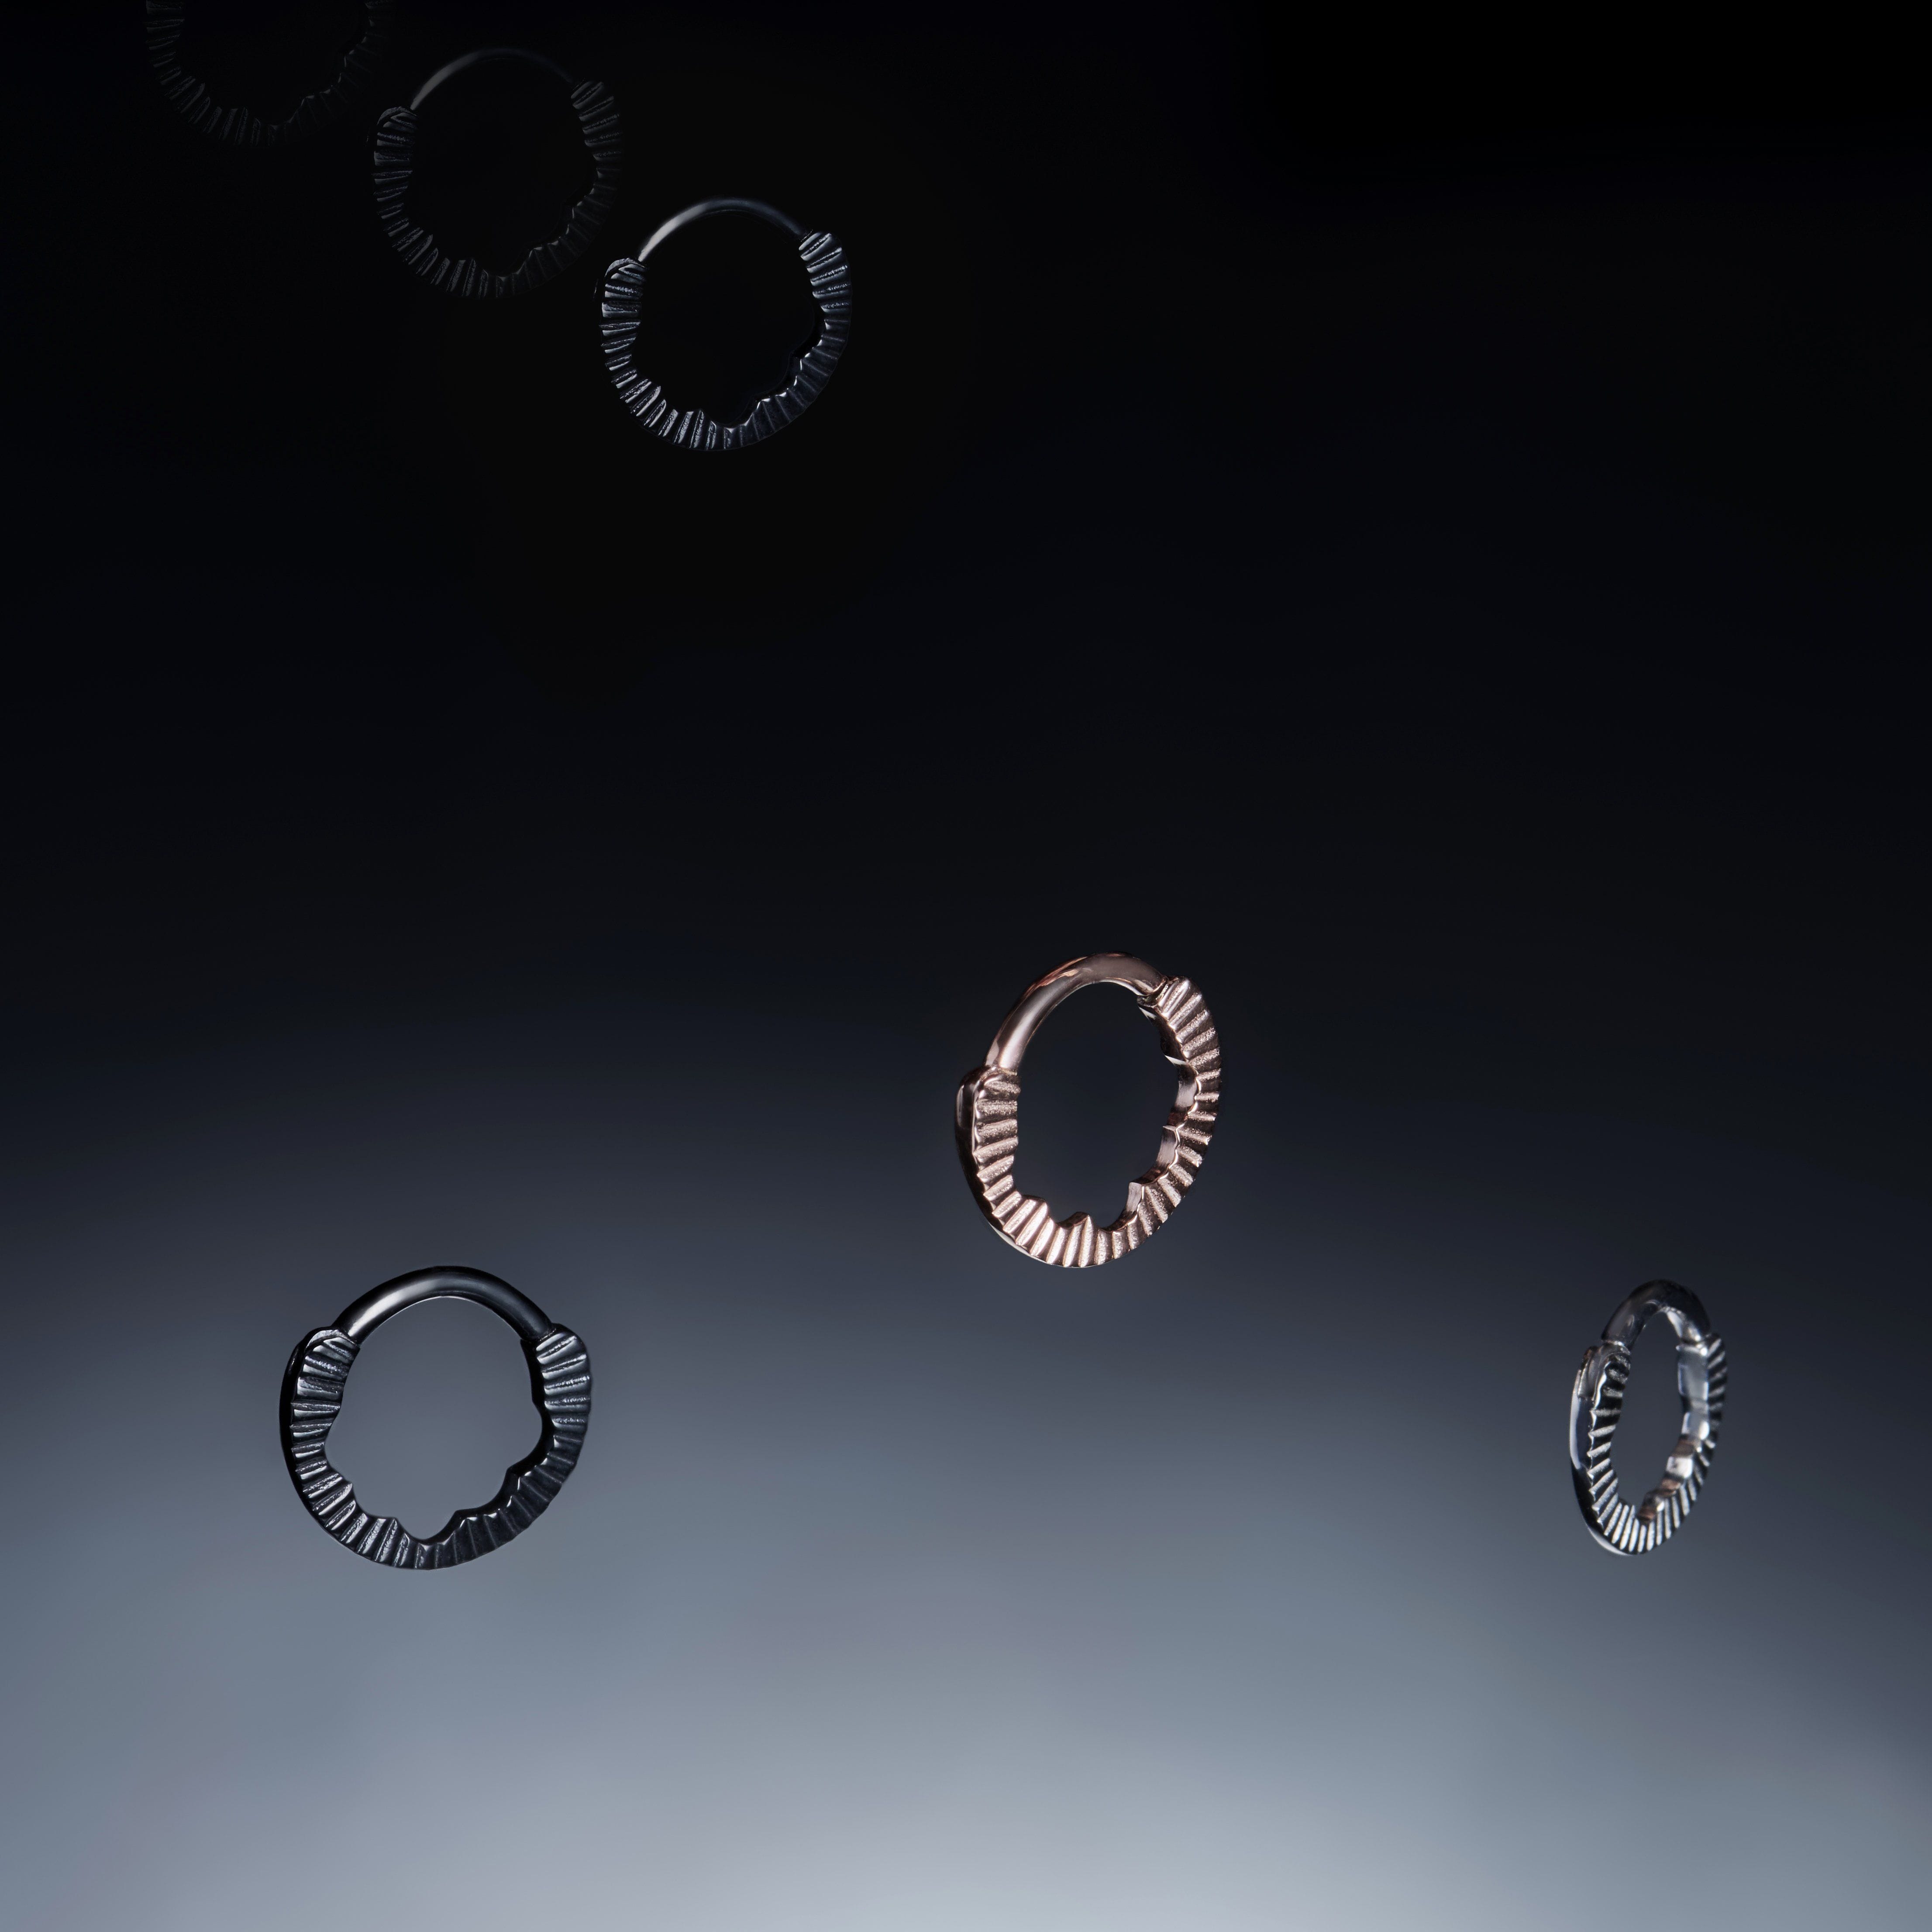 aether septum ring collection in gold, black and silver